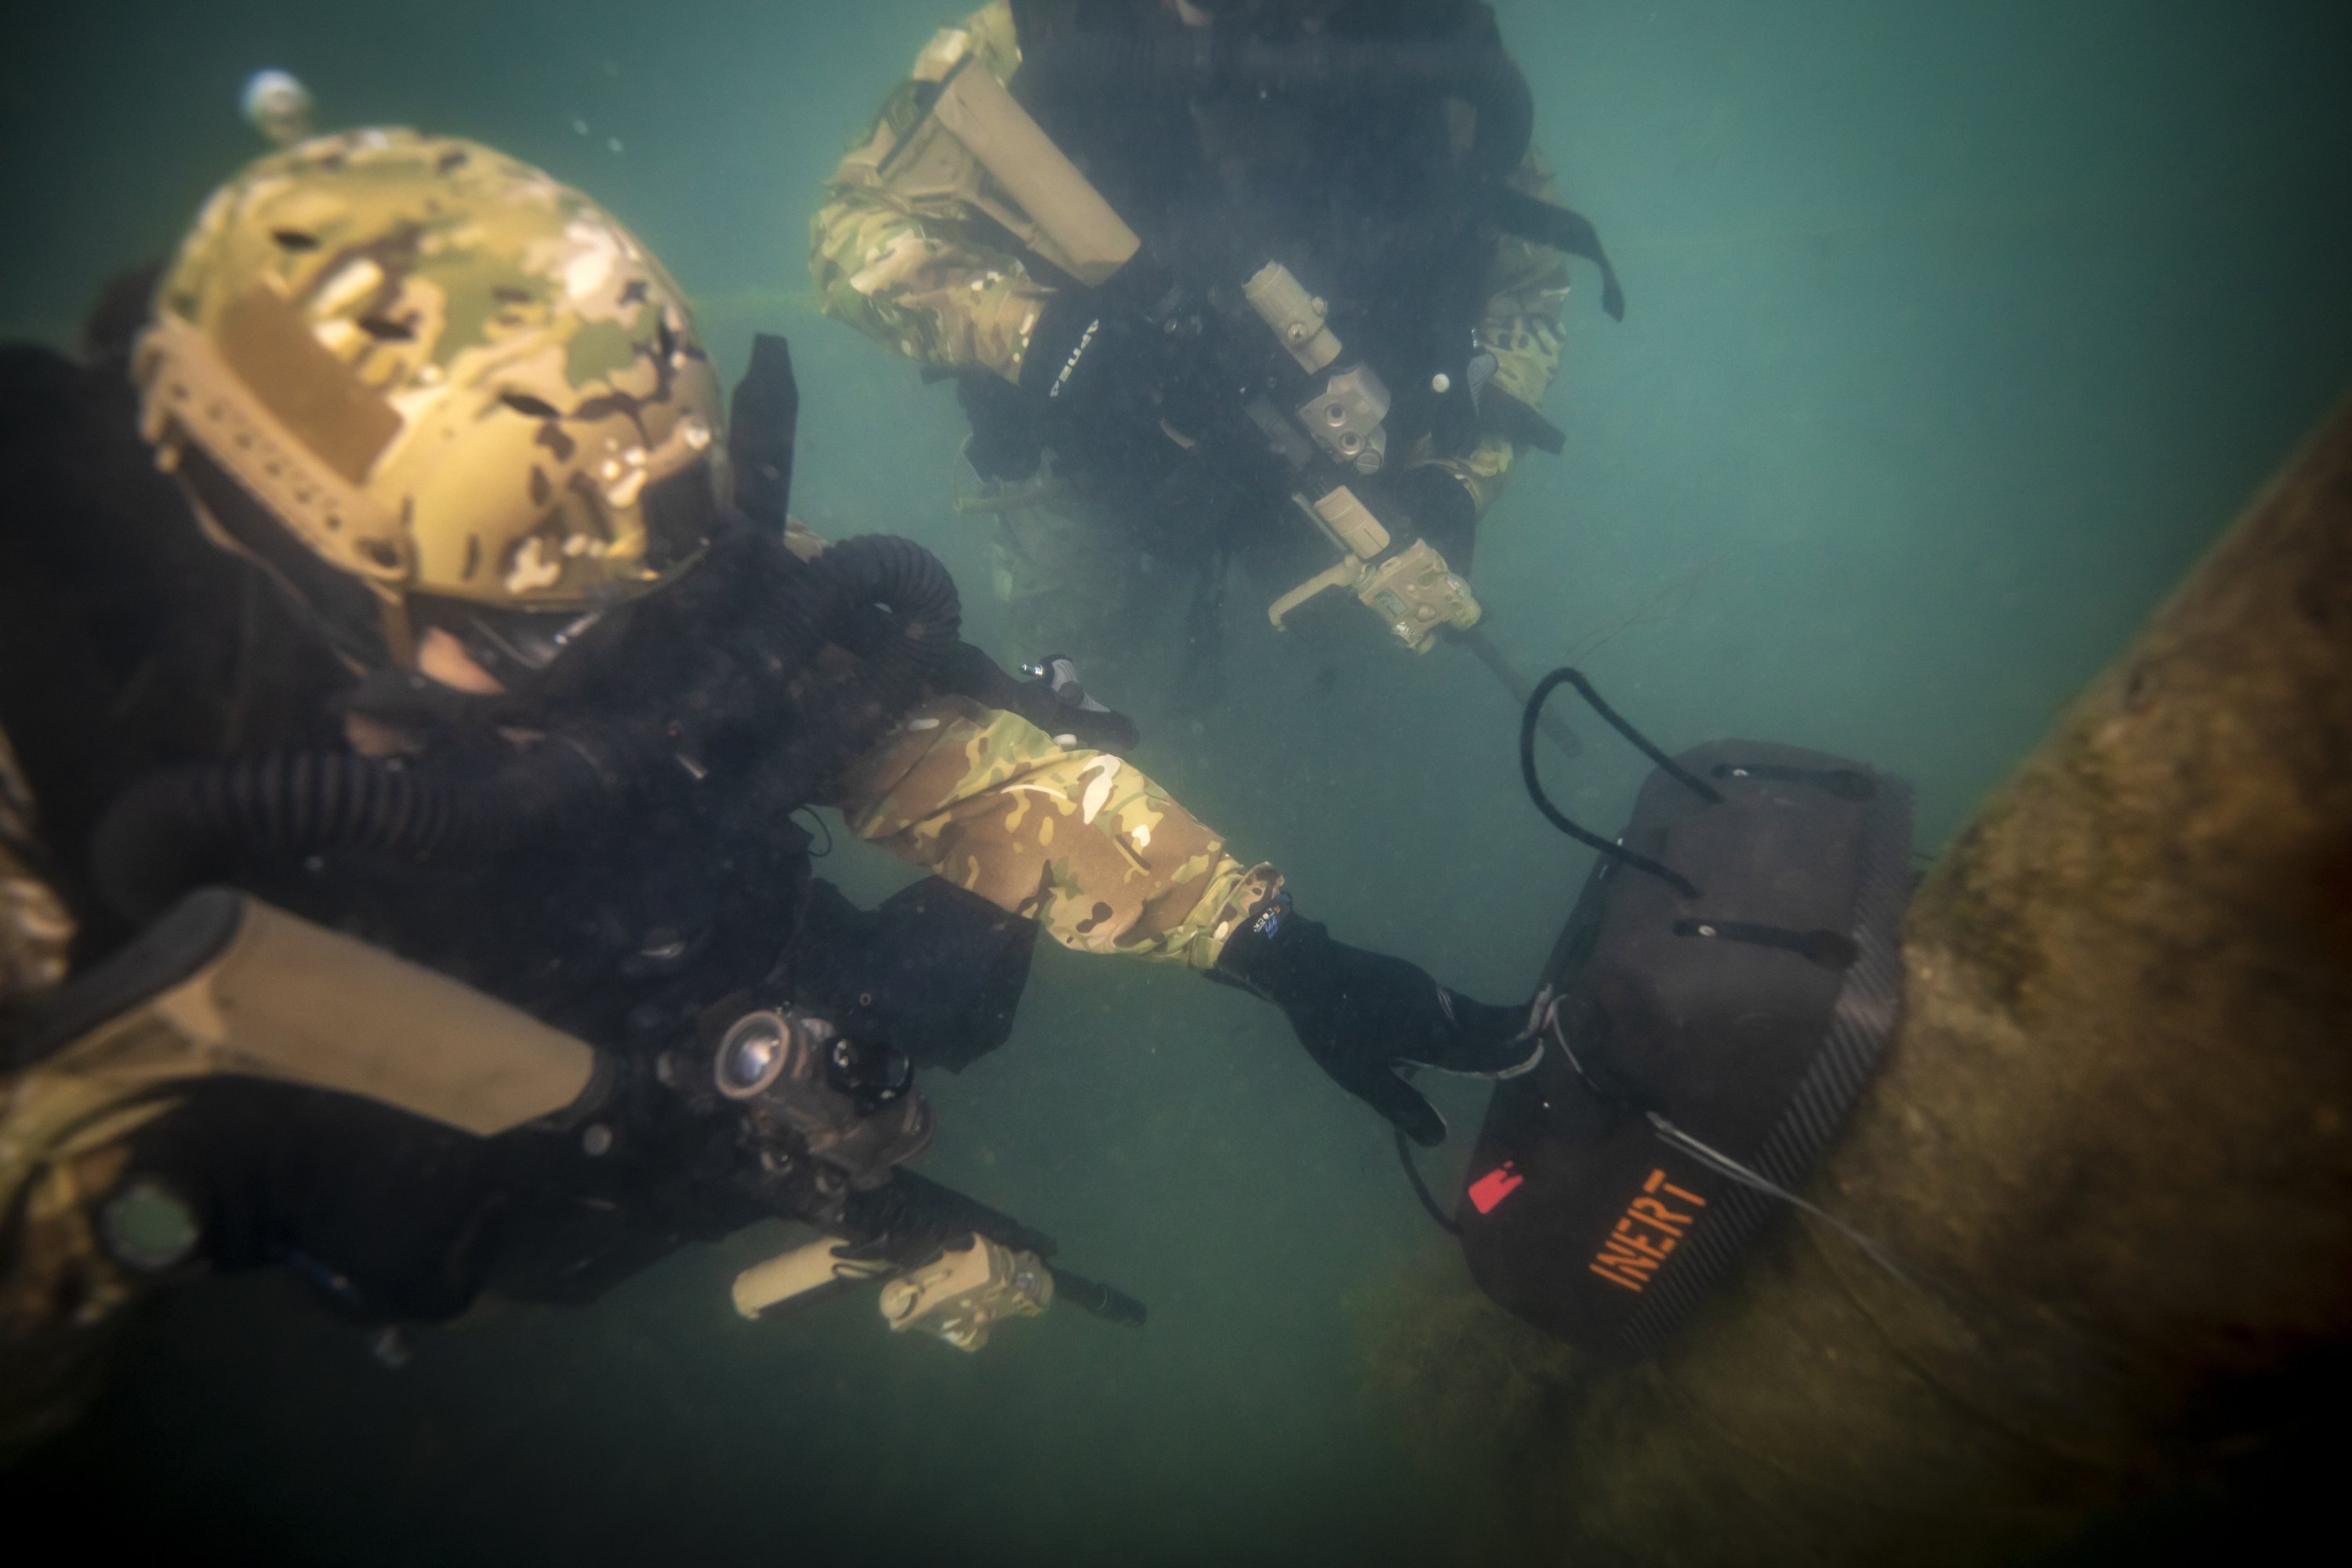 A view of SAT commandos conducting underwater training.